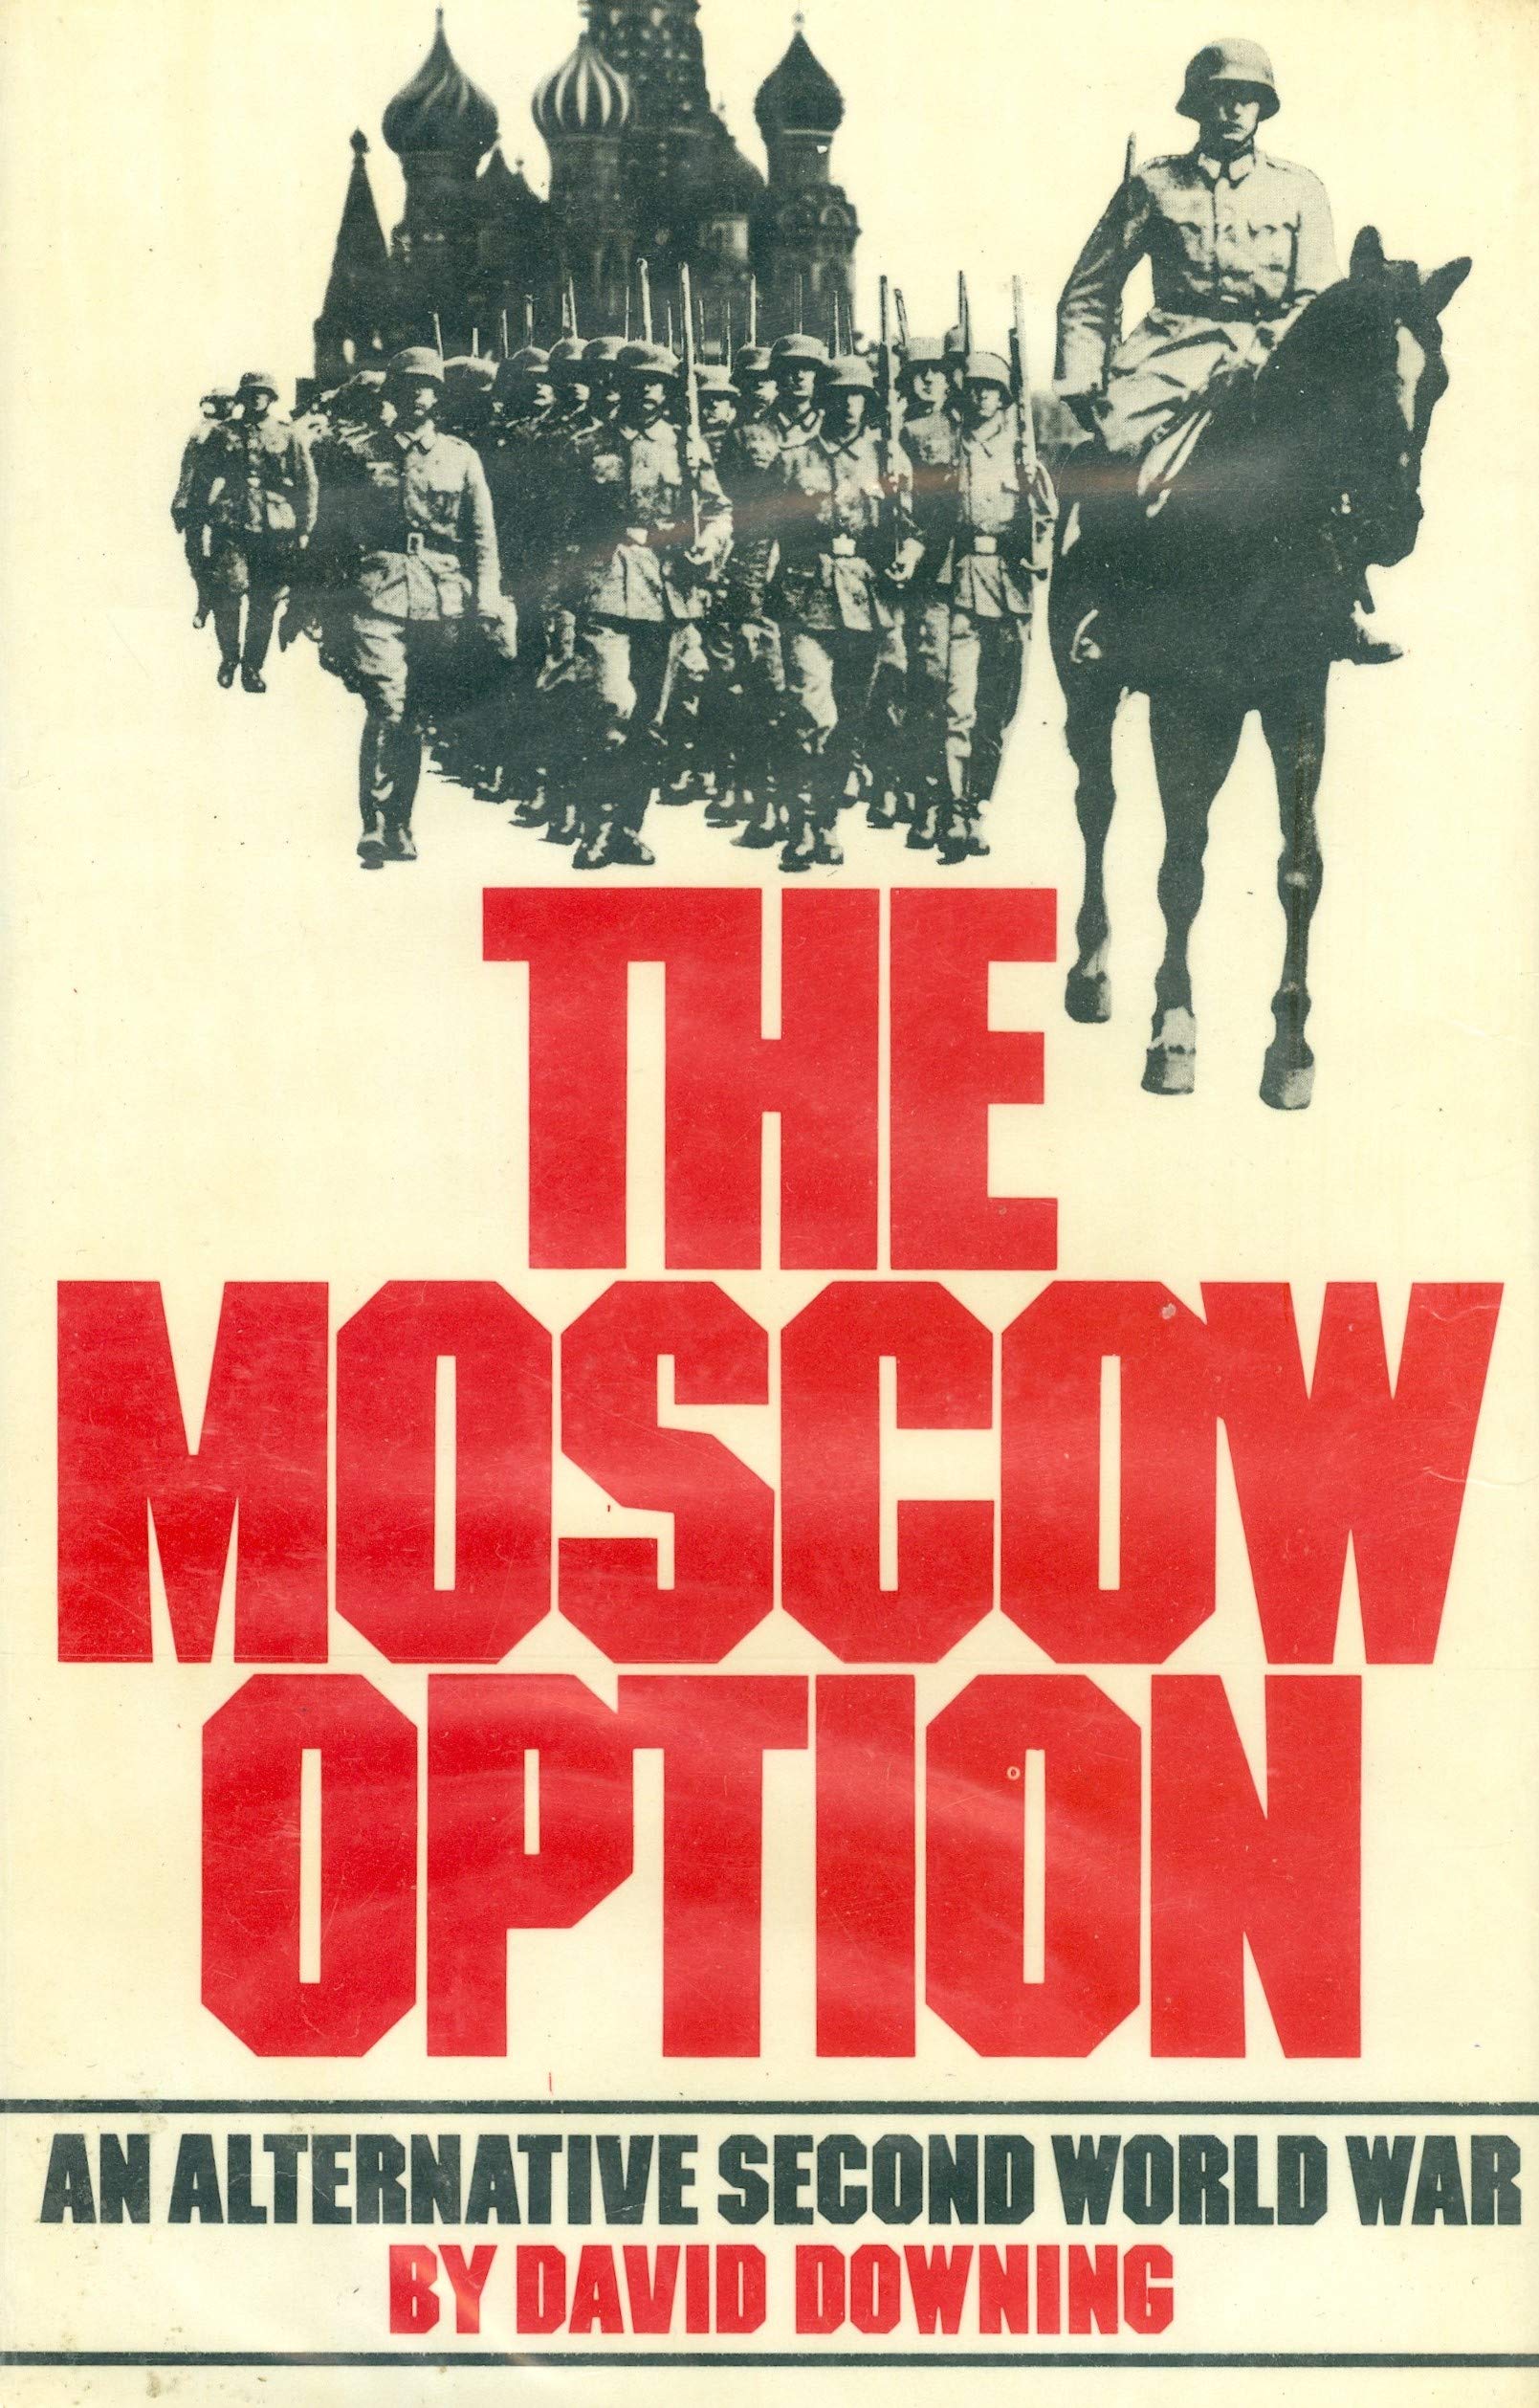 The Moscow option